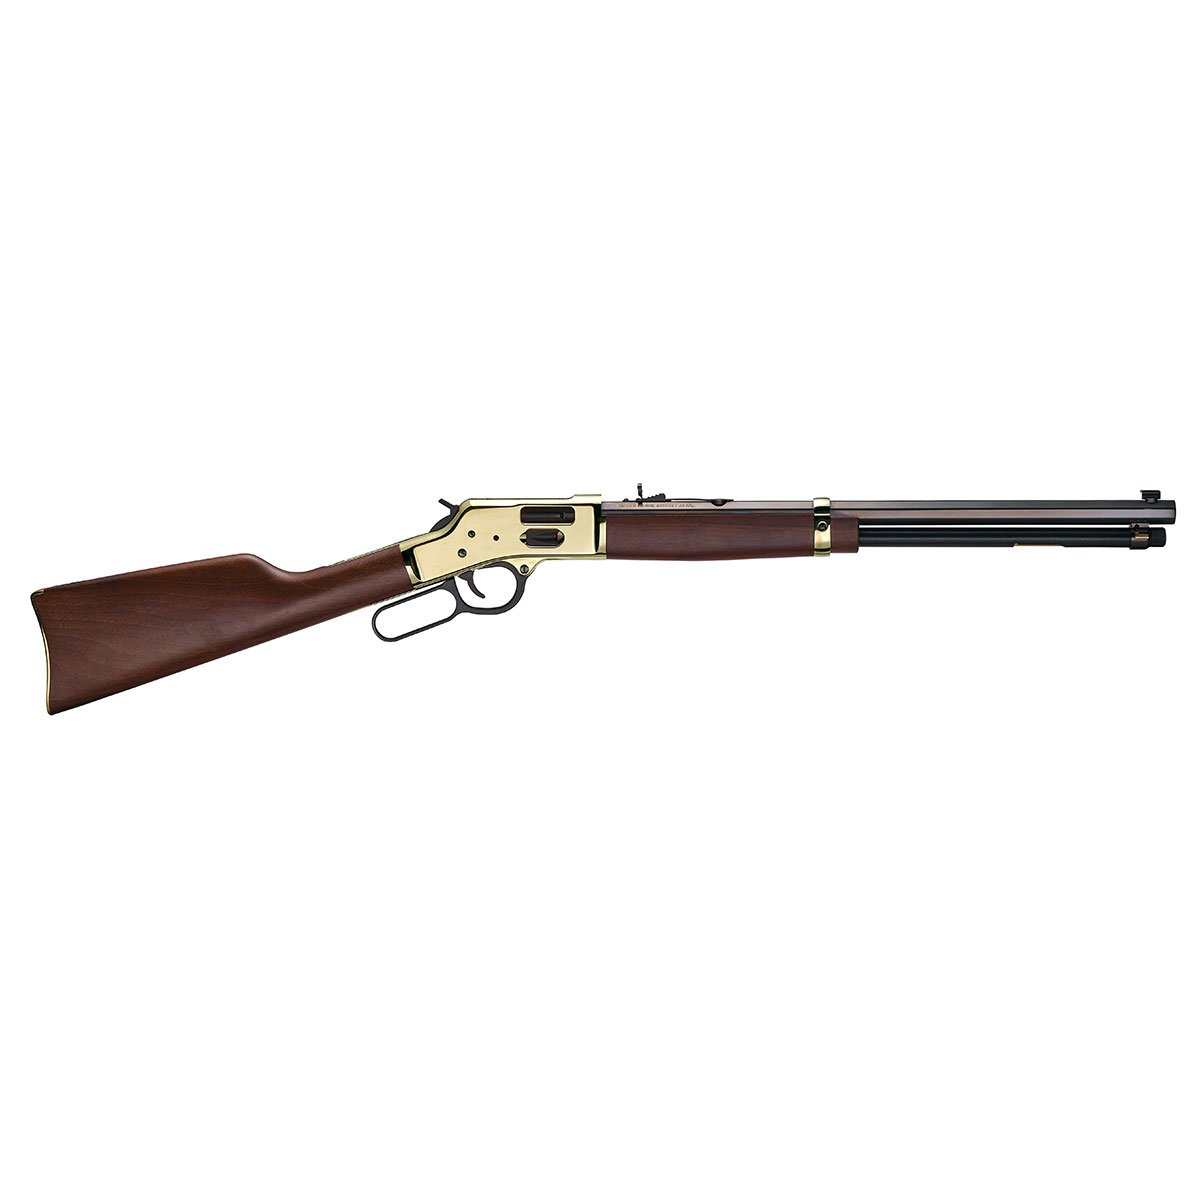 HENRY REPEATING ARMS - BIG BOY BRASS 45 COLT LEVER ACTION RIFLE